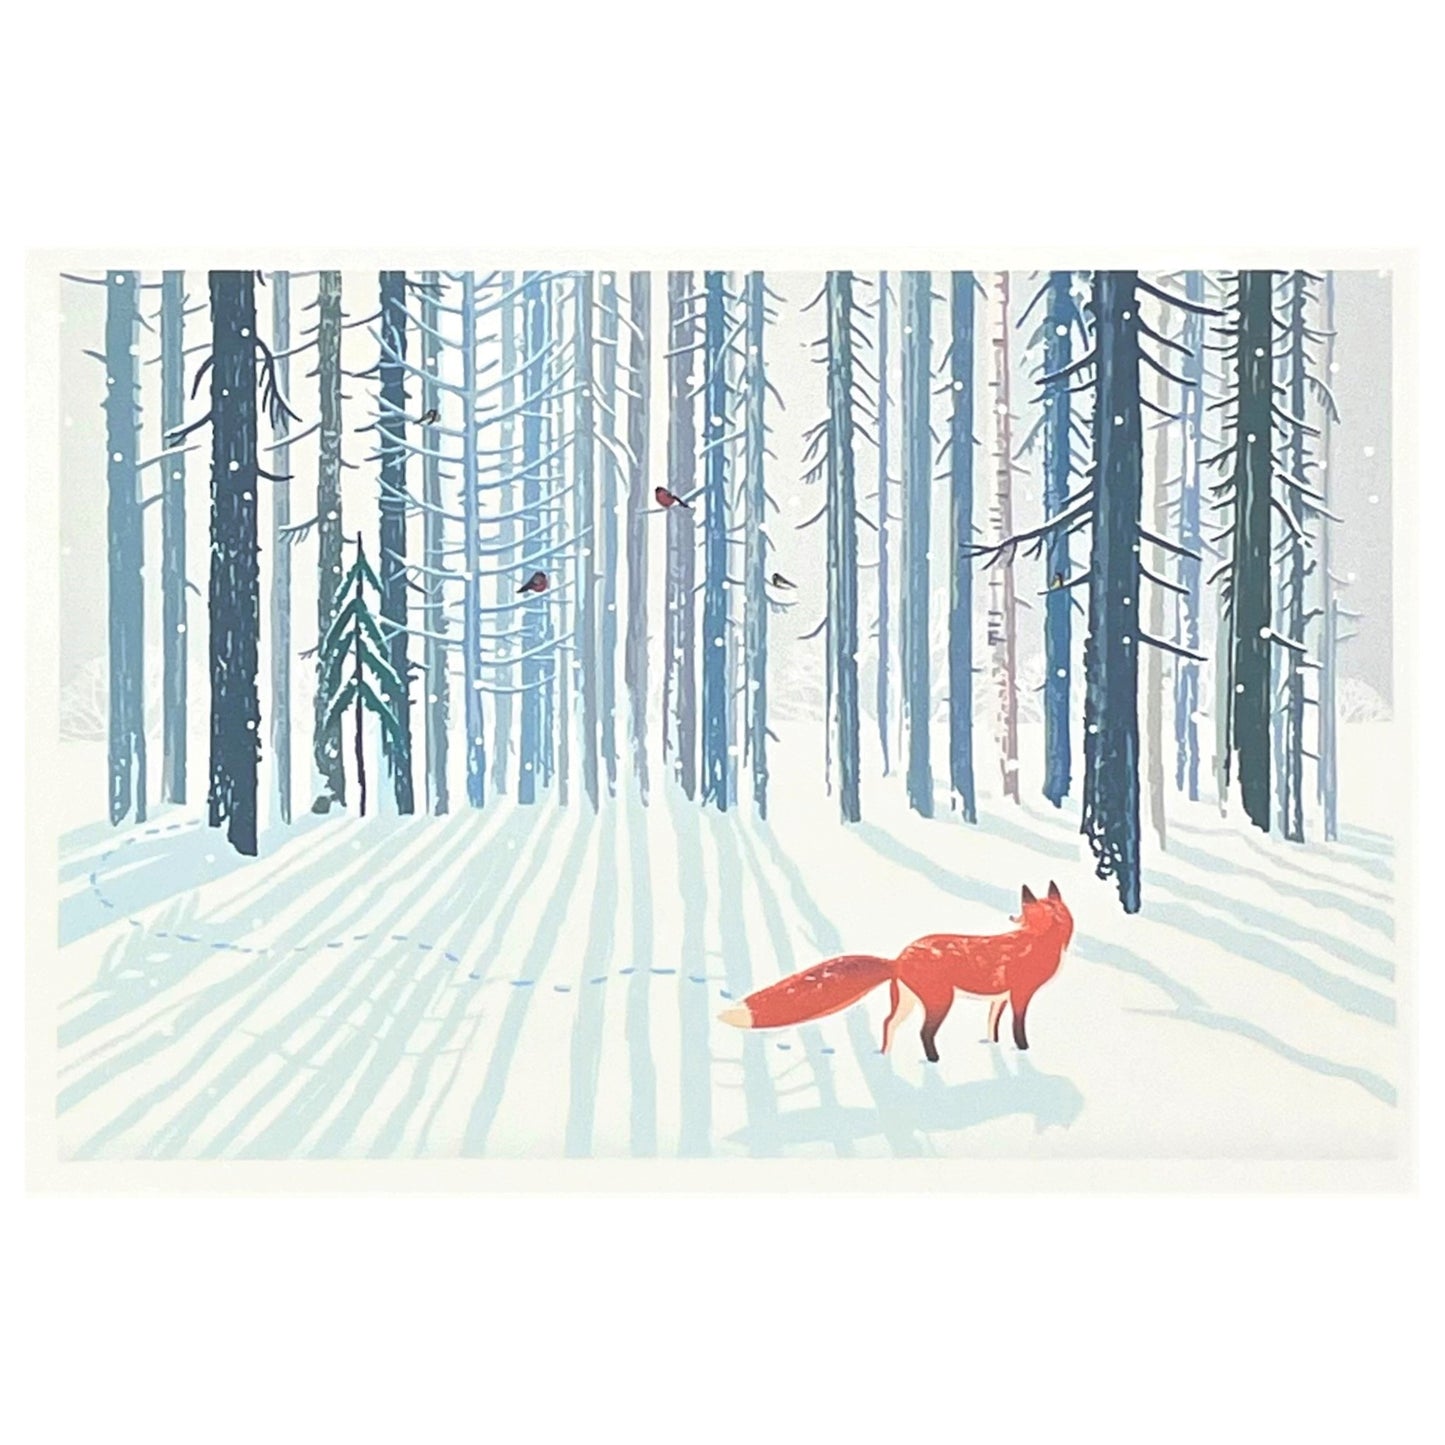 greetings card of a fox in a winter forest by Com Bossa Studio